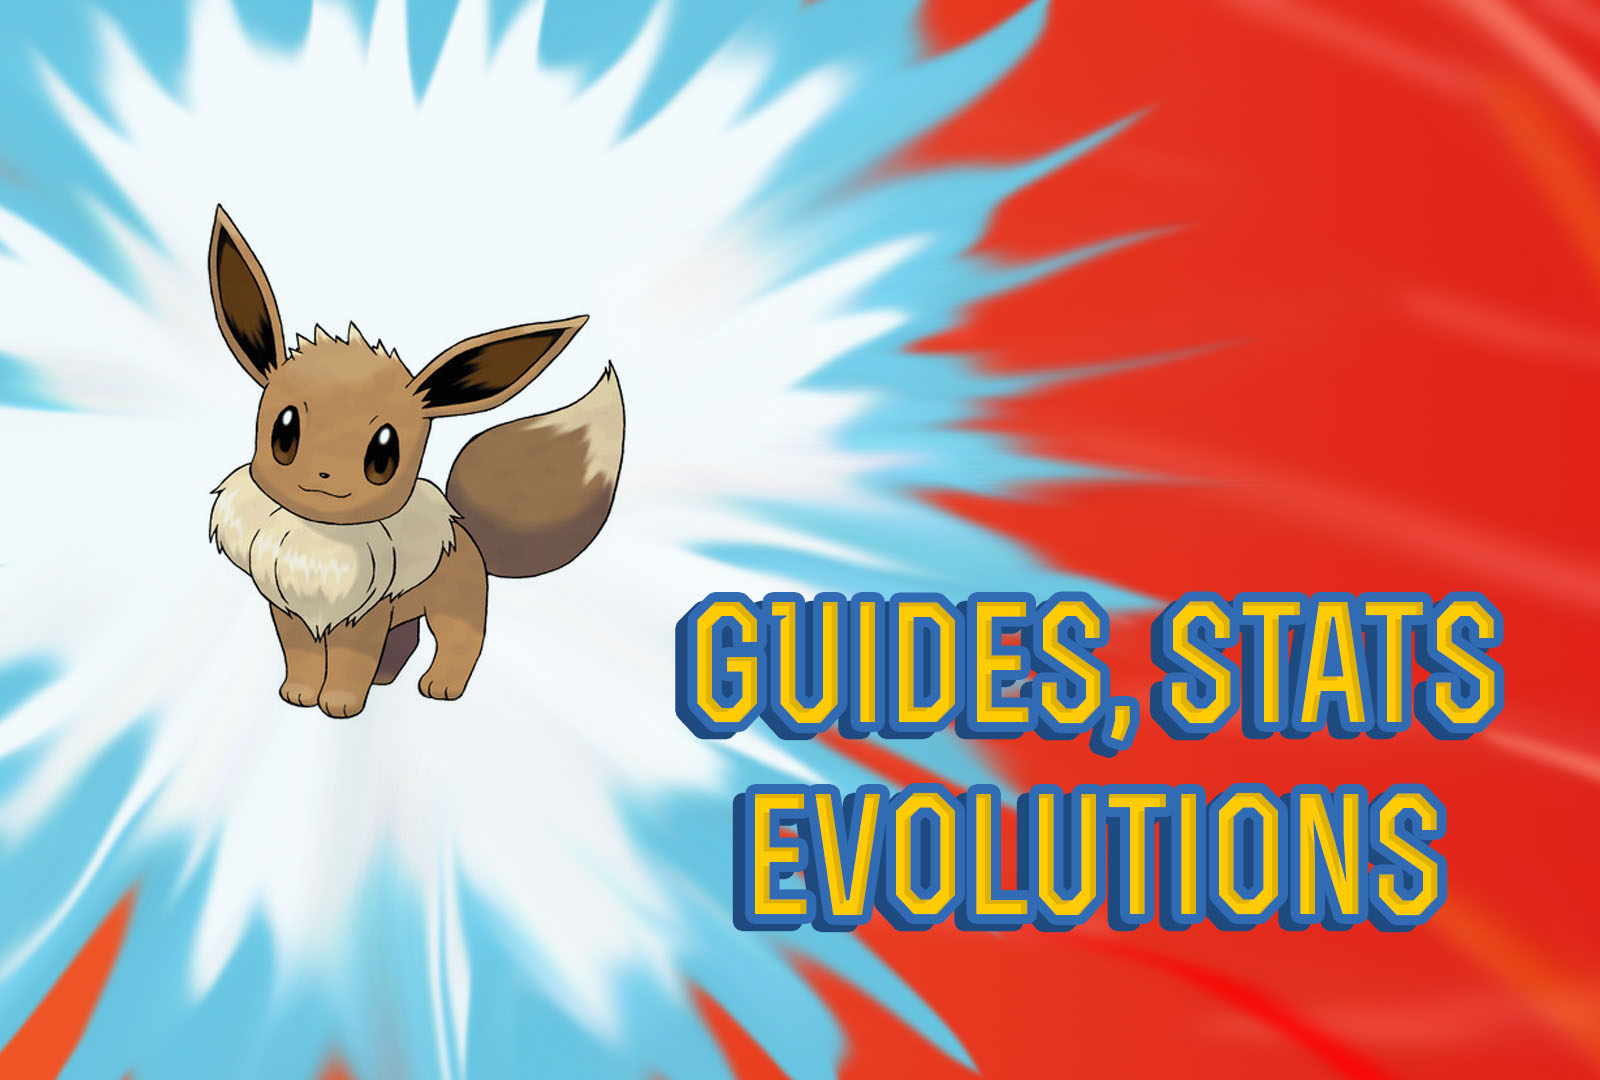 Pokemon Lets Go Eevee Guide & Stats